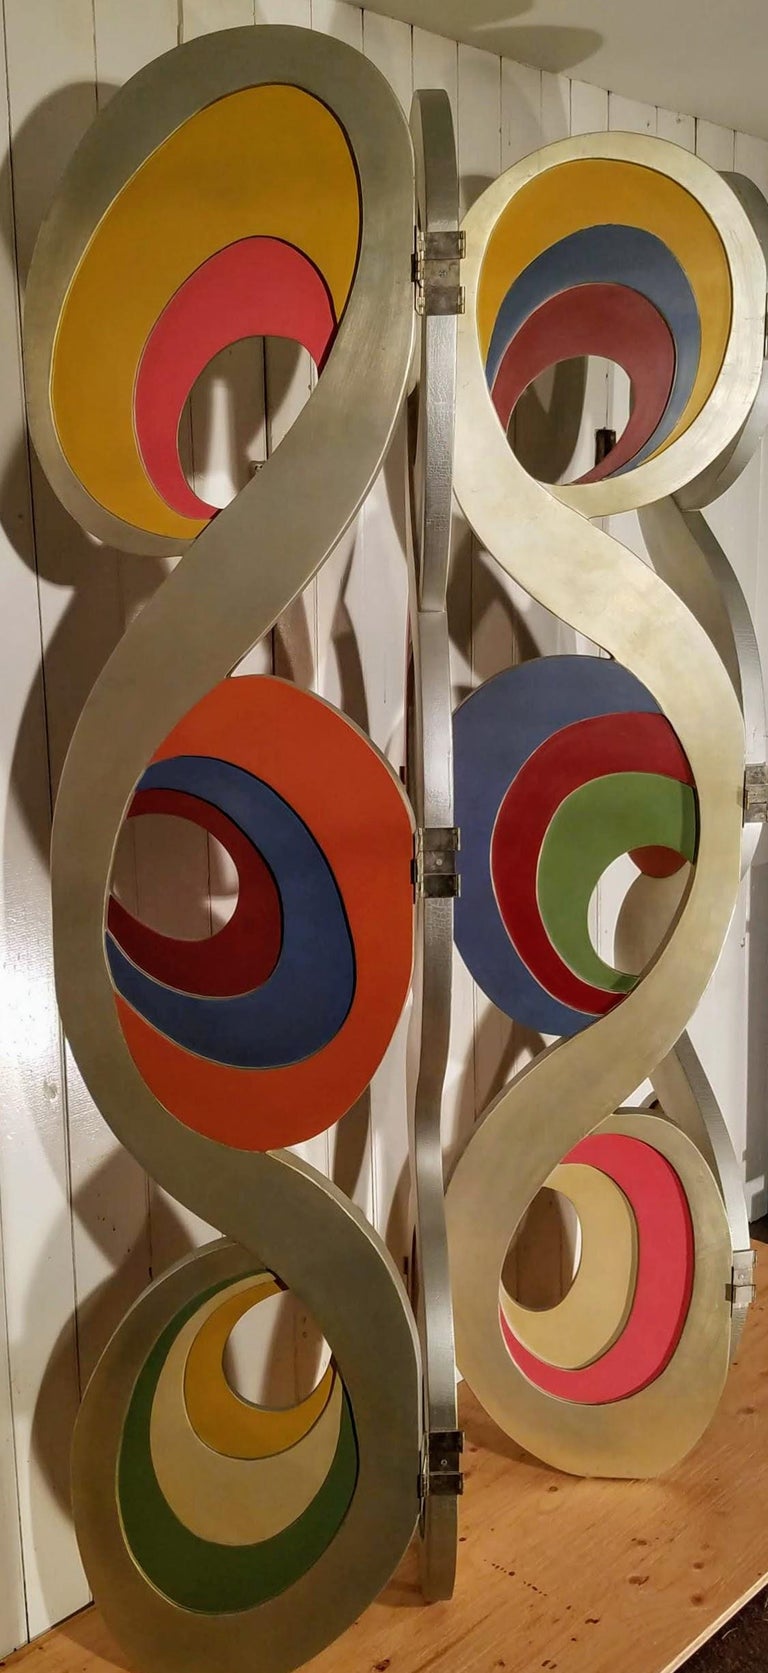 A 4-panel aluminum-leafed folding floor screen from the 1980s possibly Italian or French.

Each panel is its own individual design constructed of six cut-out sheets of wood, laminated and sculpted into arabesque curls.

The panels are connected